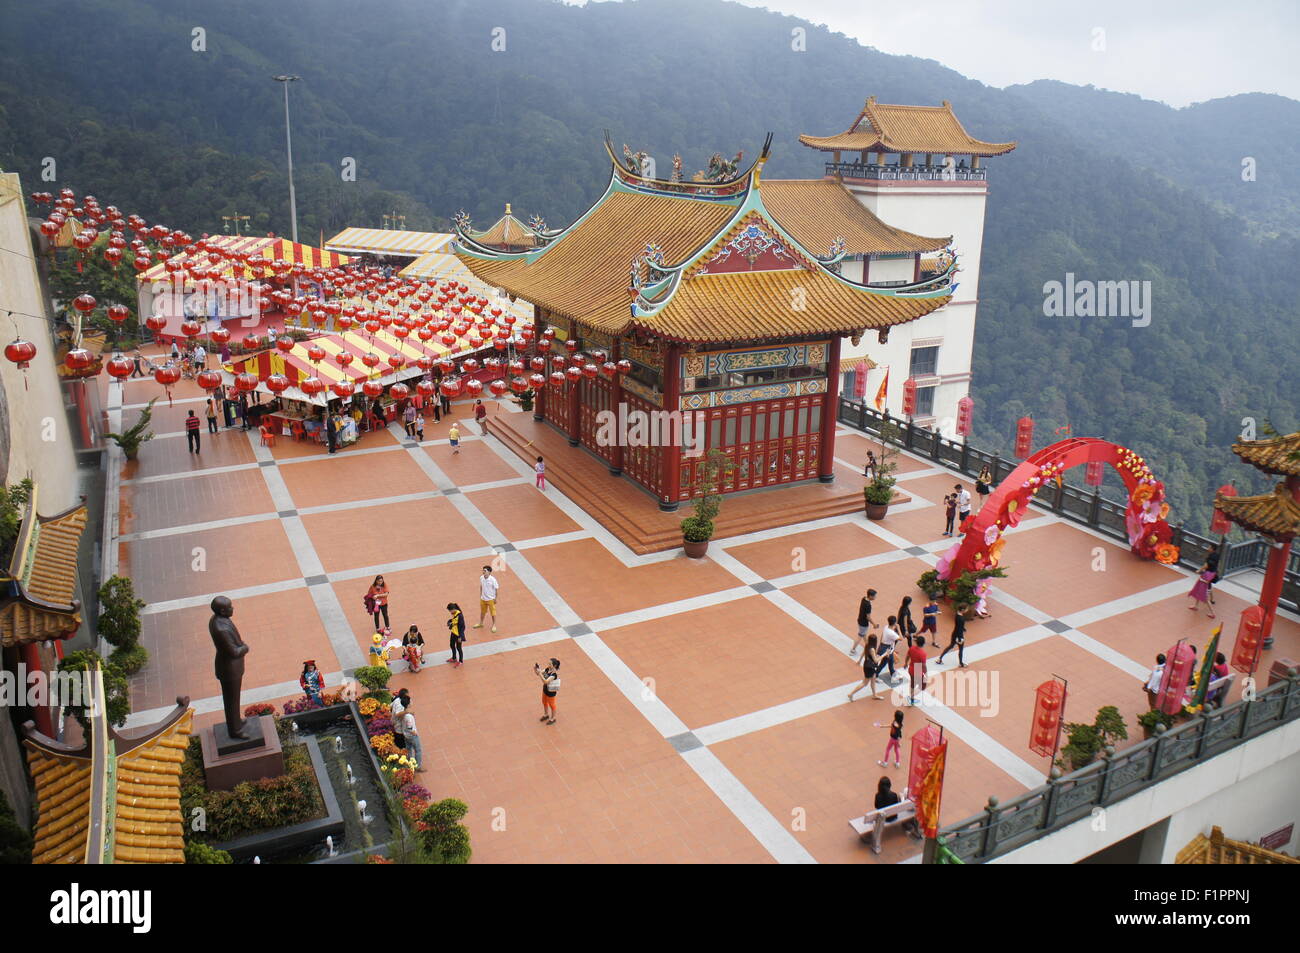 Chin Swee Tempel, Genting Highlands, Malaysia Stockfoto